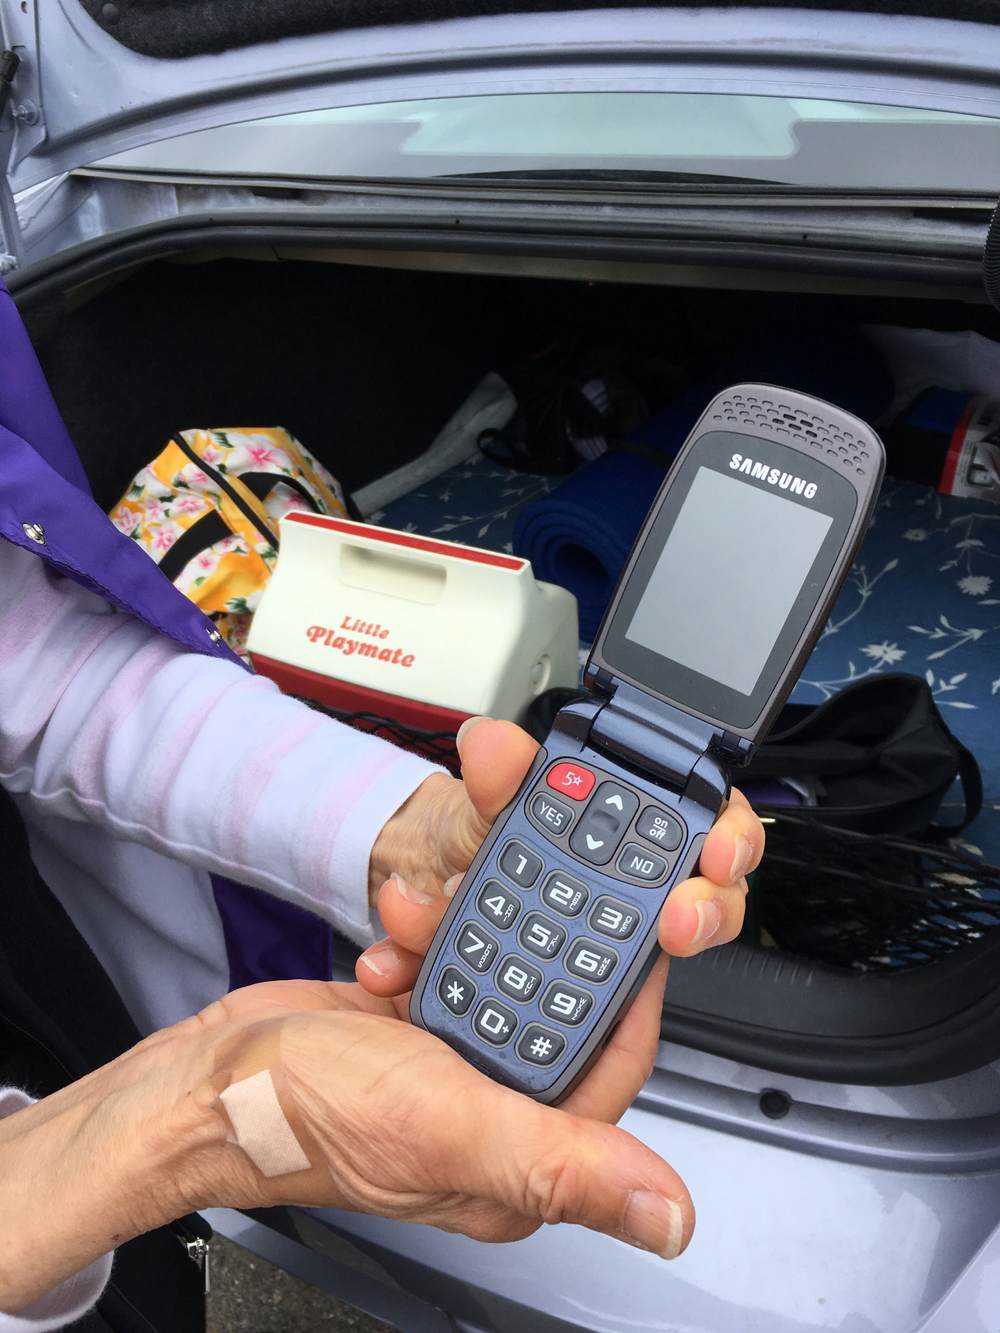 A pair of hands holds an open Samsung flip phone, in front of an open car trunk